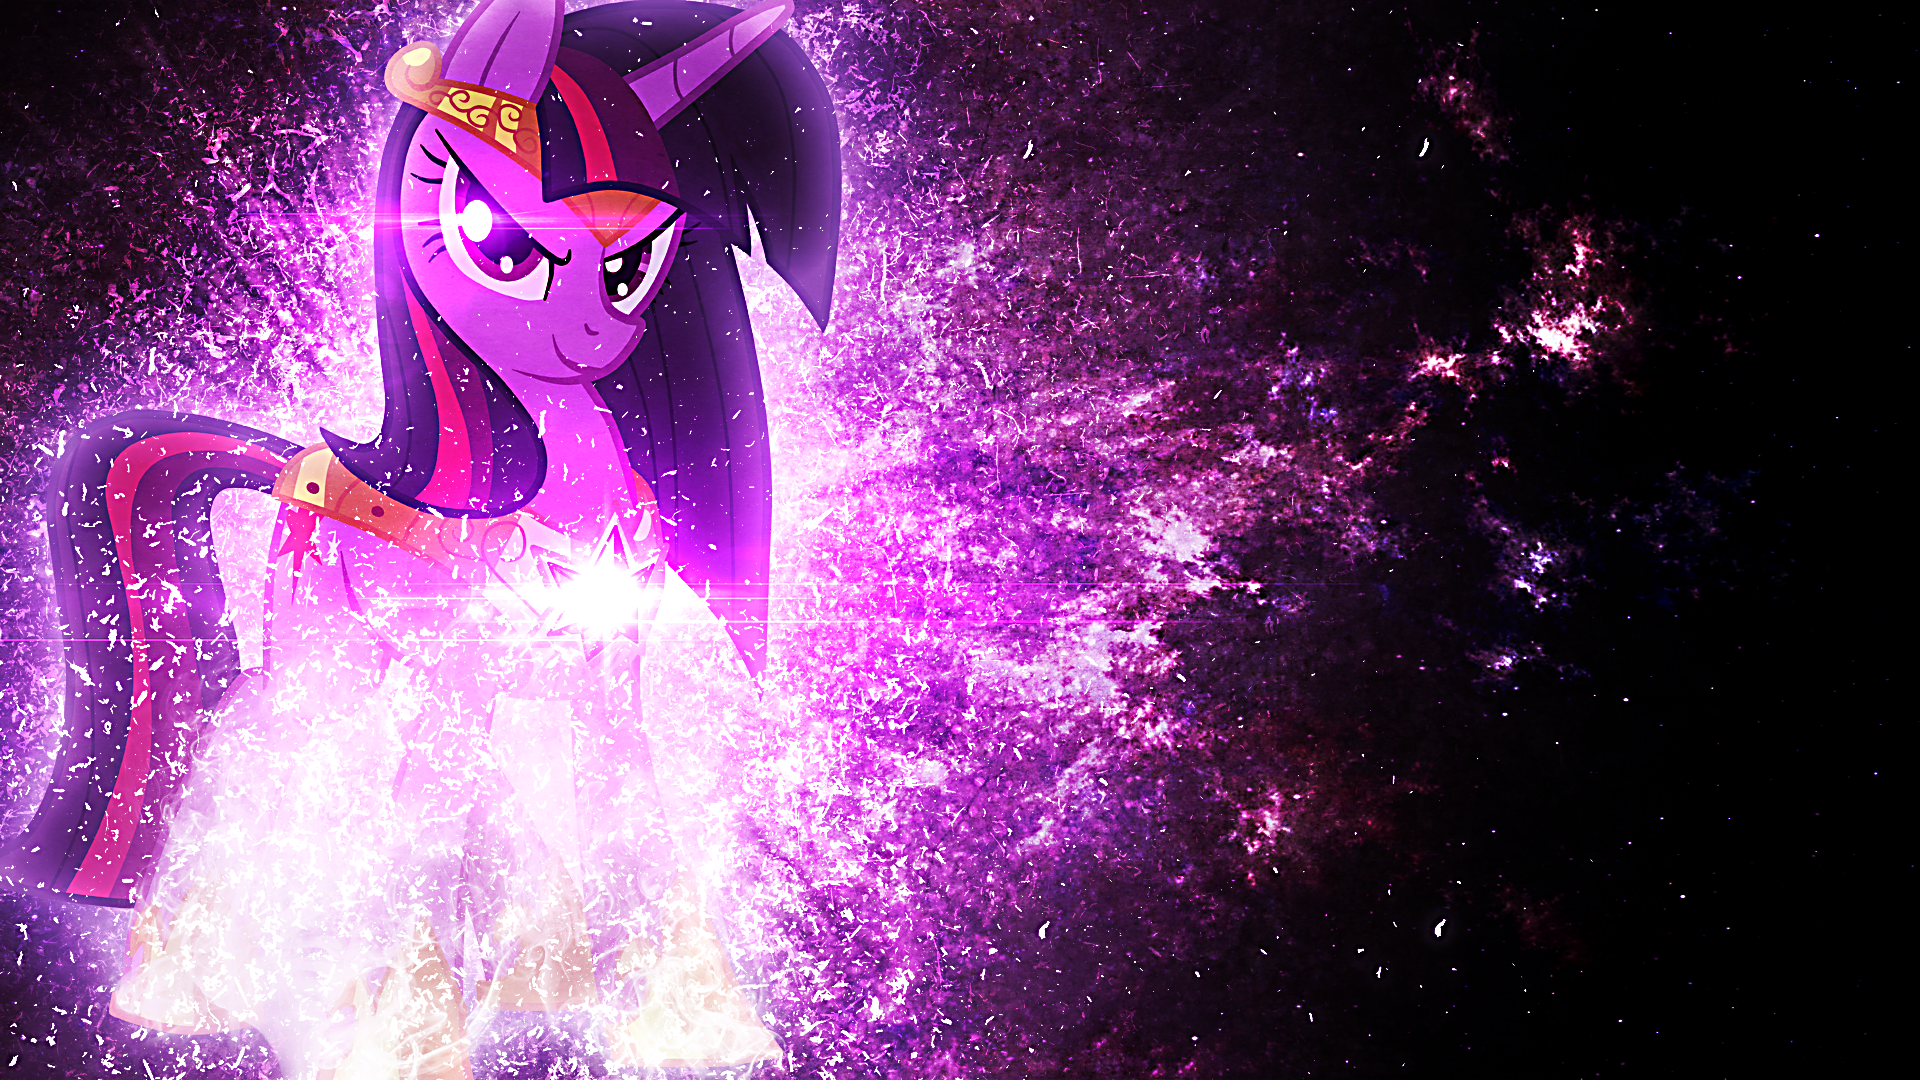 Twilight Guardian Of Magic - Wallpaper by Equestria-Prevails, JennieOo and Tzolkine